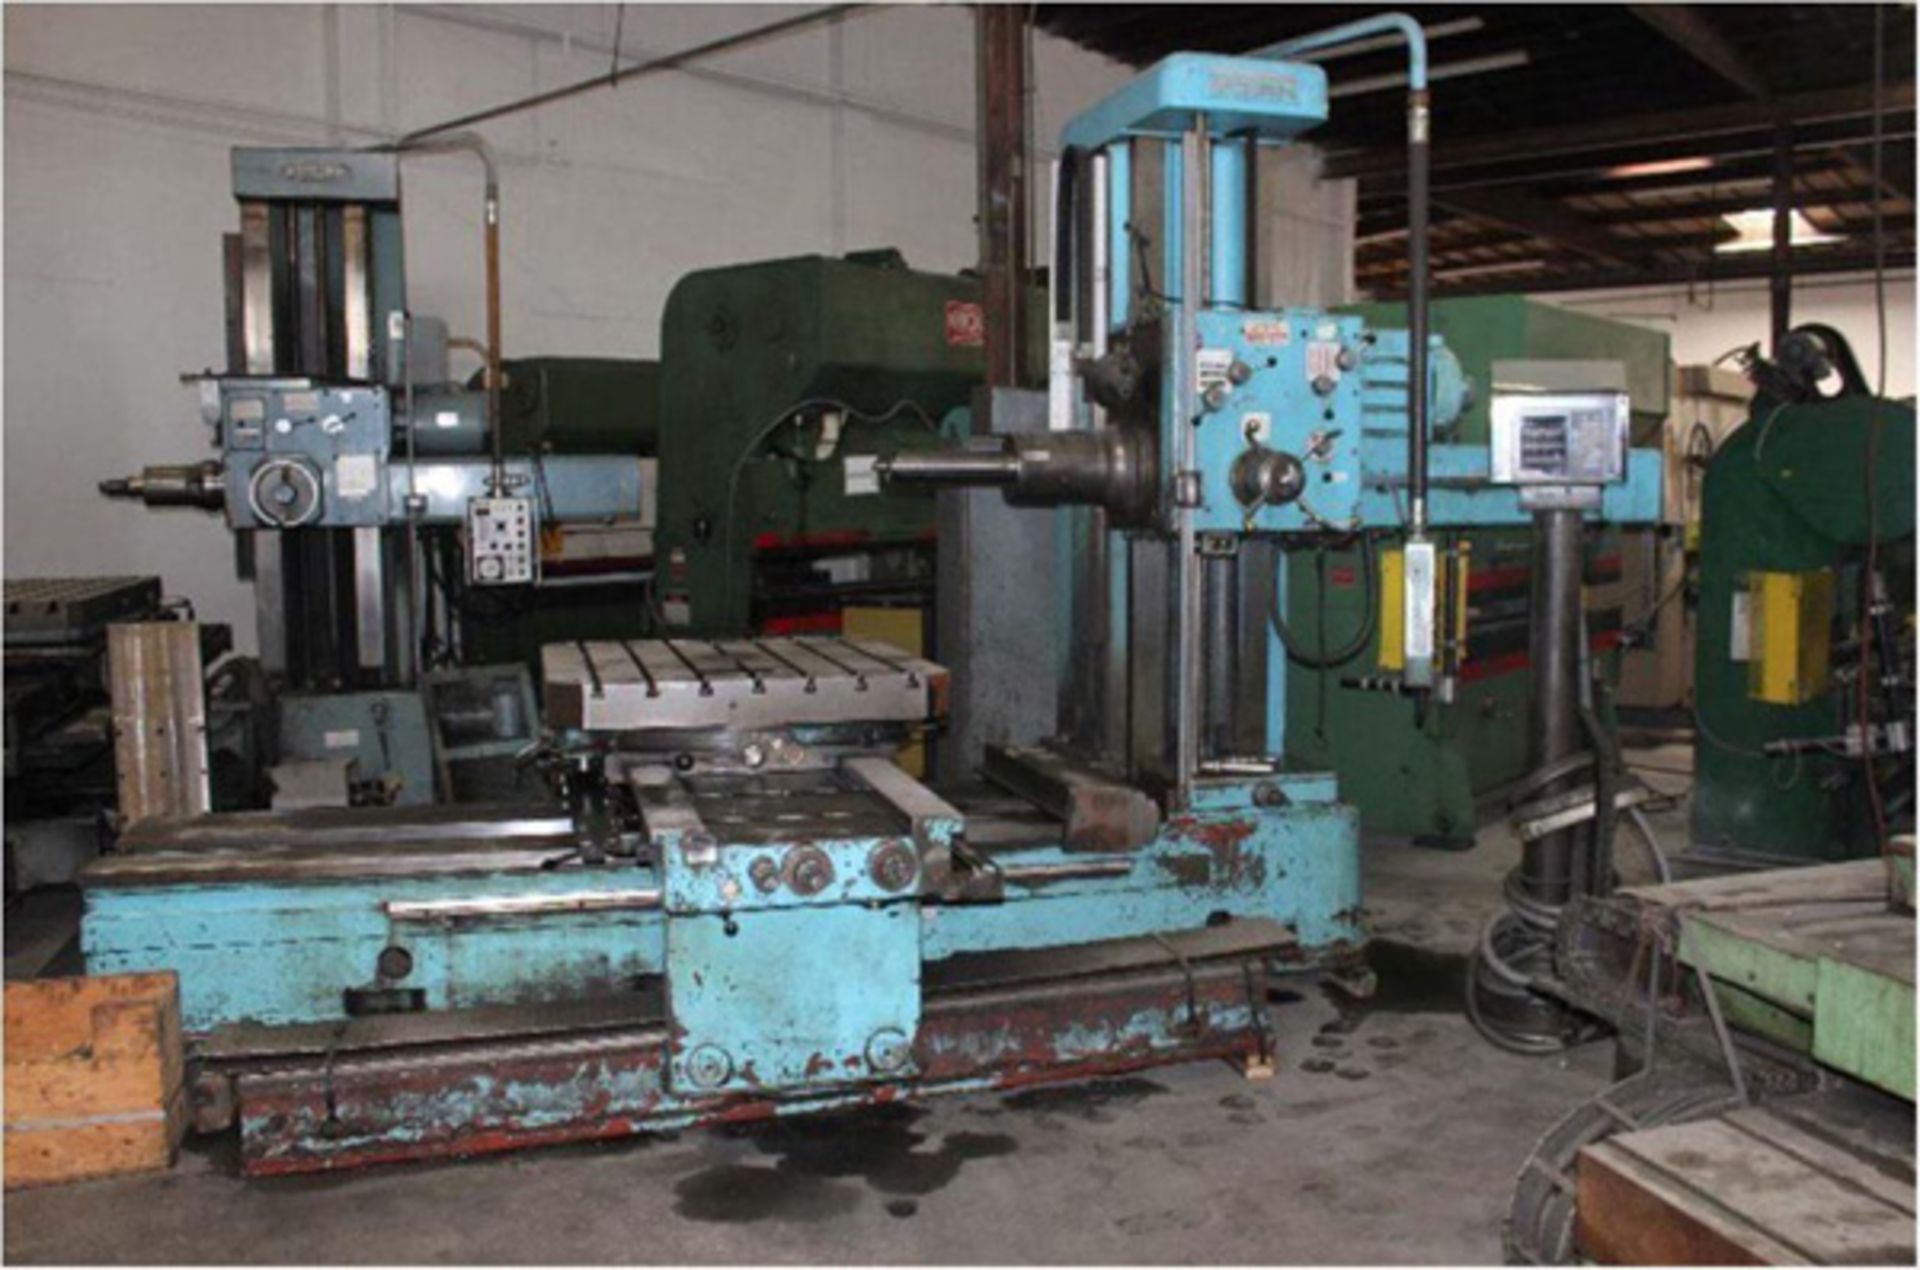 1966 Wotan Table Type Horizontal Boring Mill (Rotary Table), 4", Mdl: B-100S, S/N: 52386, Located